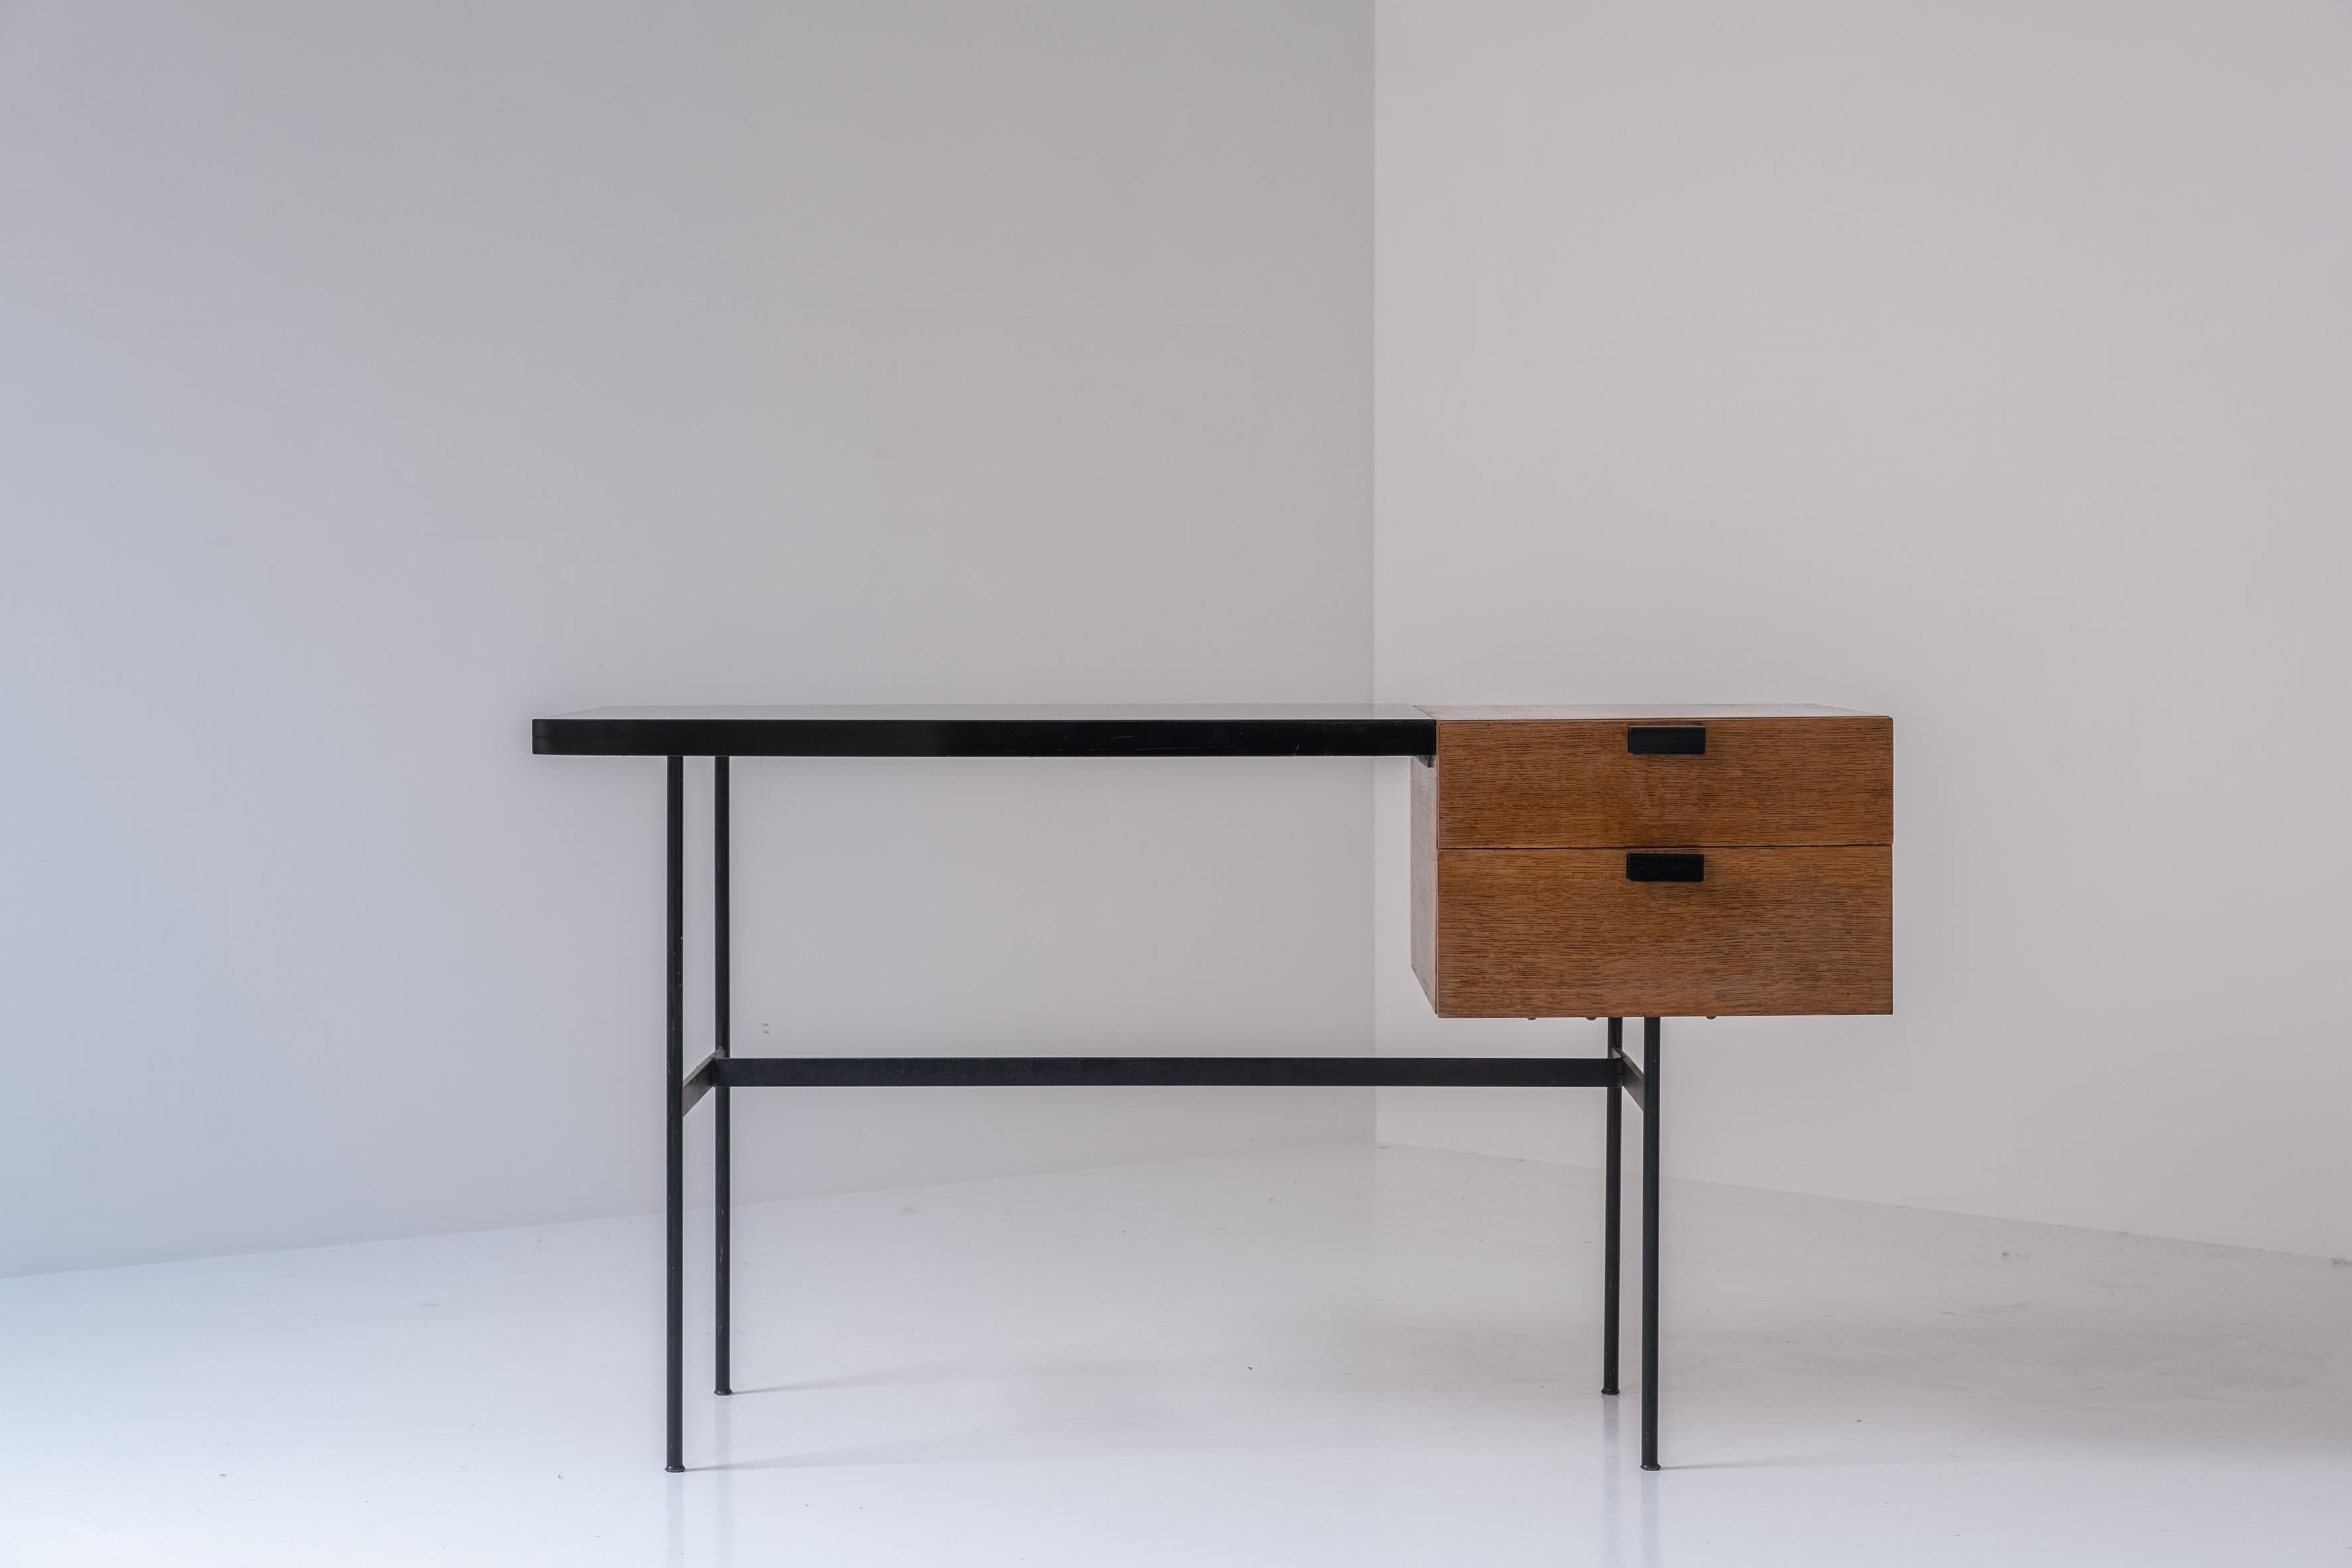 Admire this early ‘CM141’ desk by Pierre Paulin for Thonet, France 1953. This perfect proportioned desk features a black lacquered steel frame with a black formica top. On the right a drawer section made out of blond teak veneer. Restored with love.